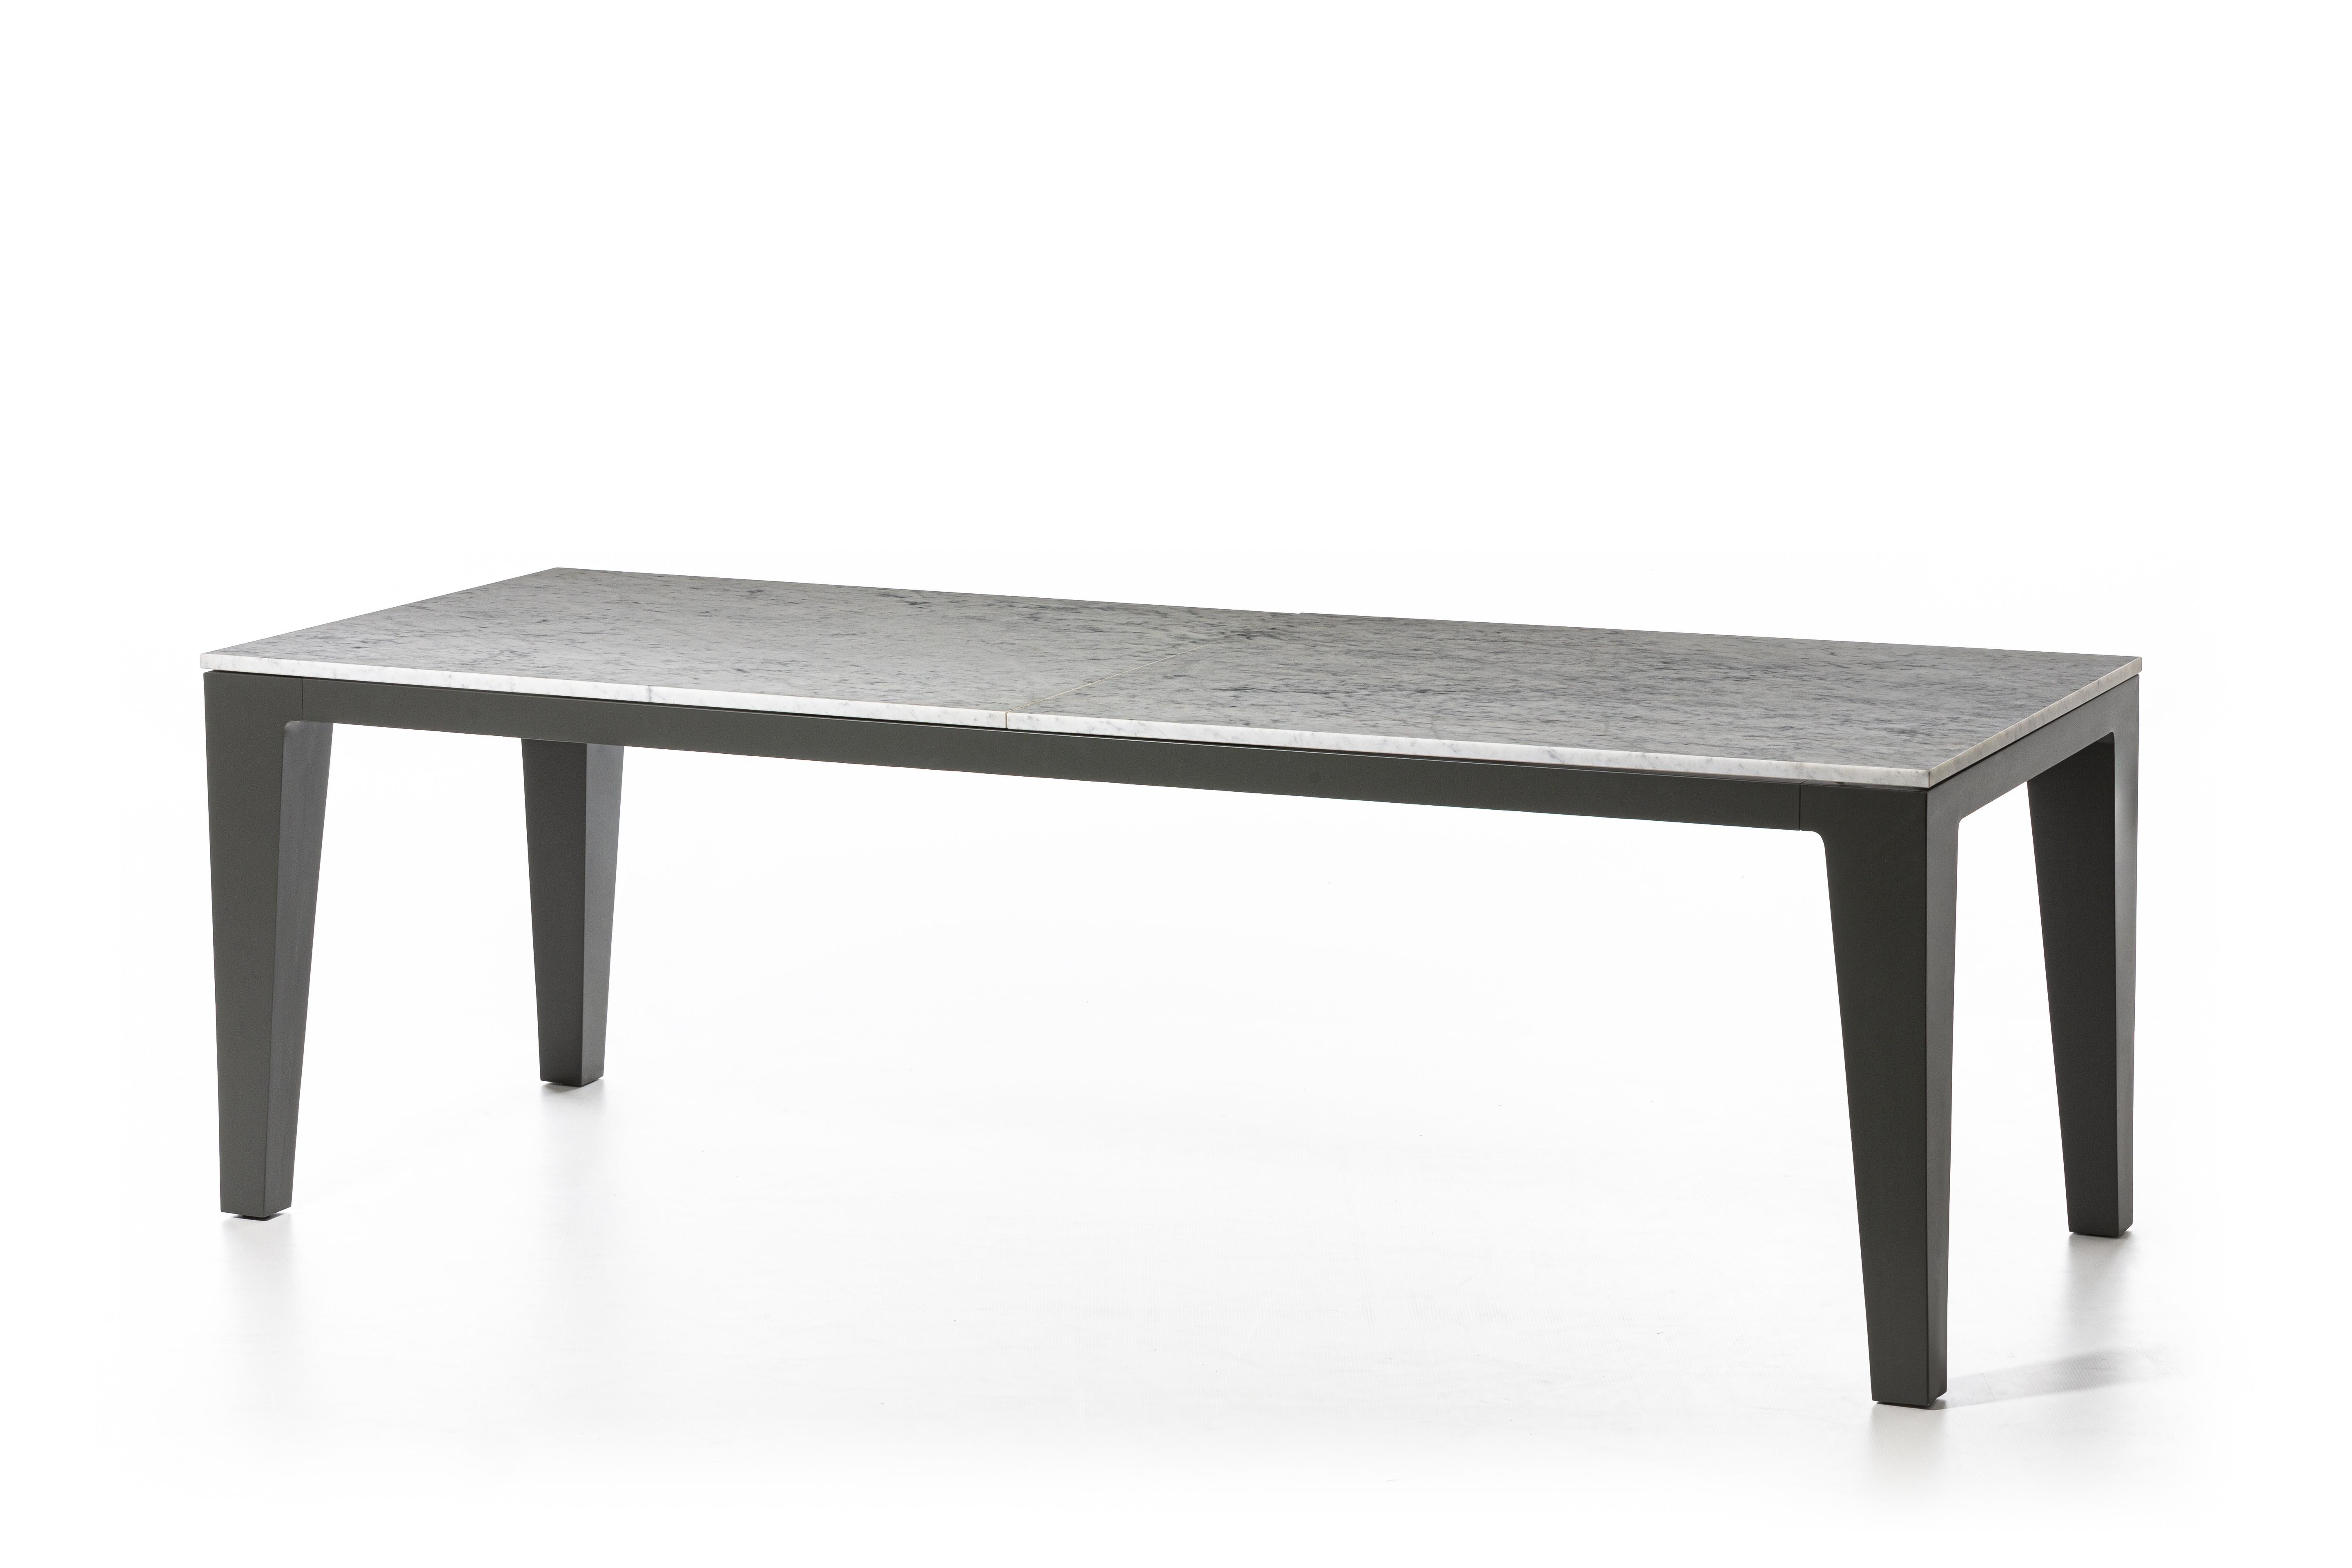 Family of tables born from the union of different materials, Inout 143/144 have a rectangular top and are available in various sizes. Formed of a structure in matt white, grey or sage painted aluminium, they have the top available in different